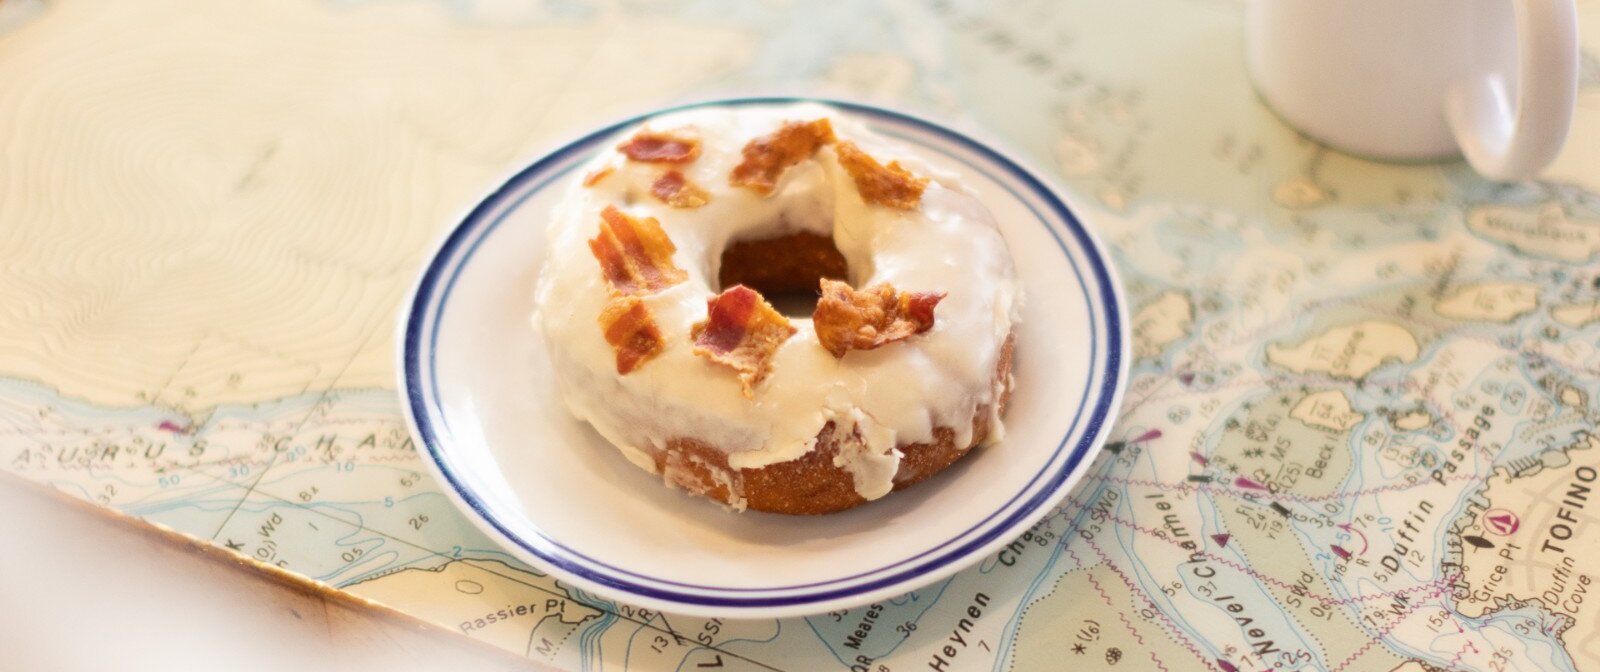 Maple bacon donut on map of Clayoquot Sound